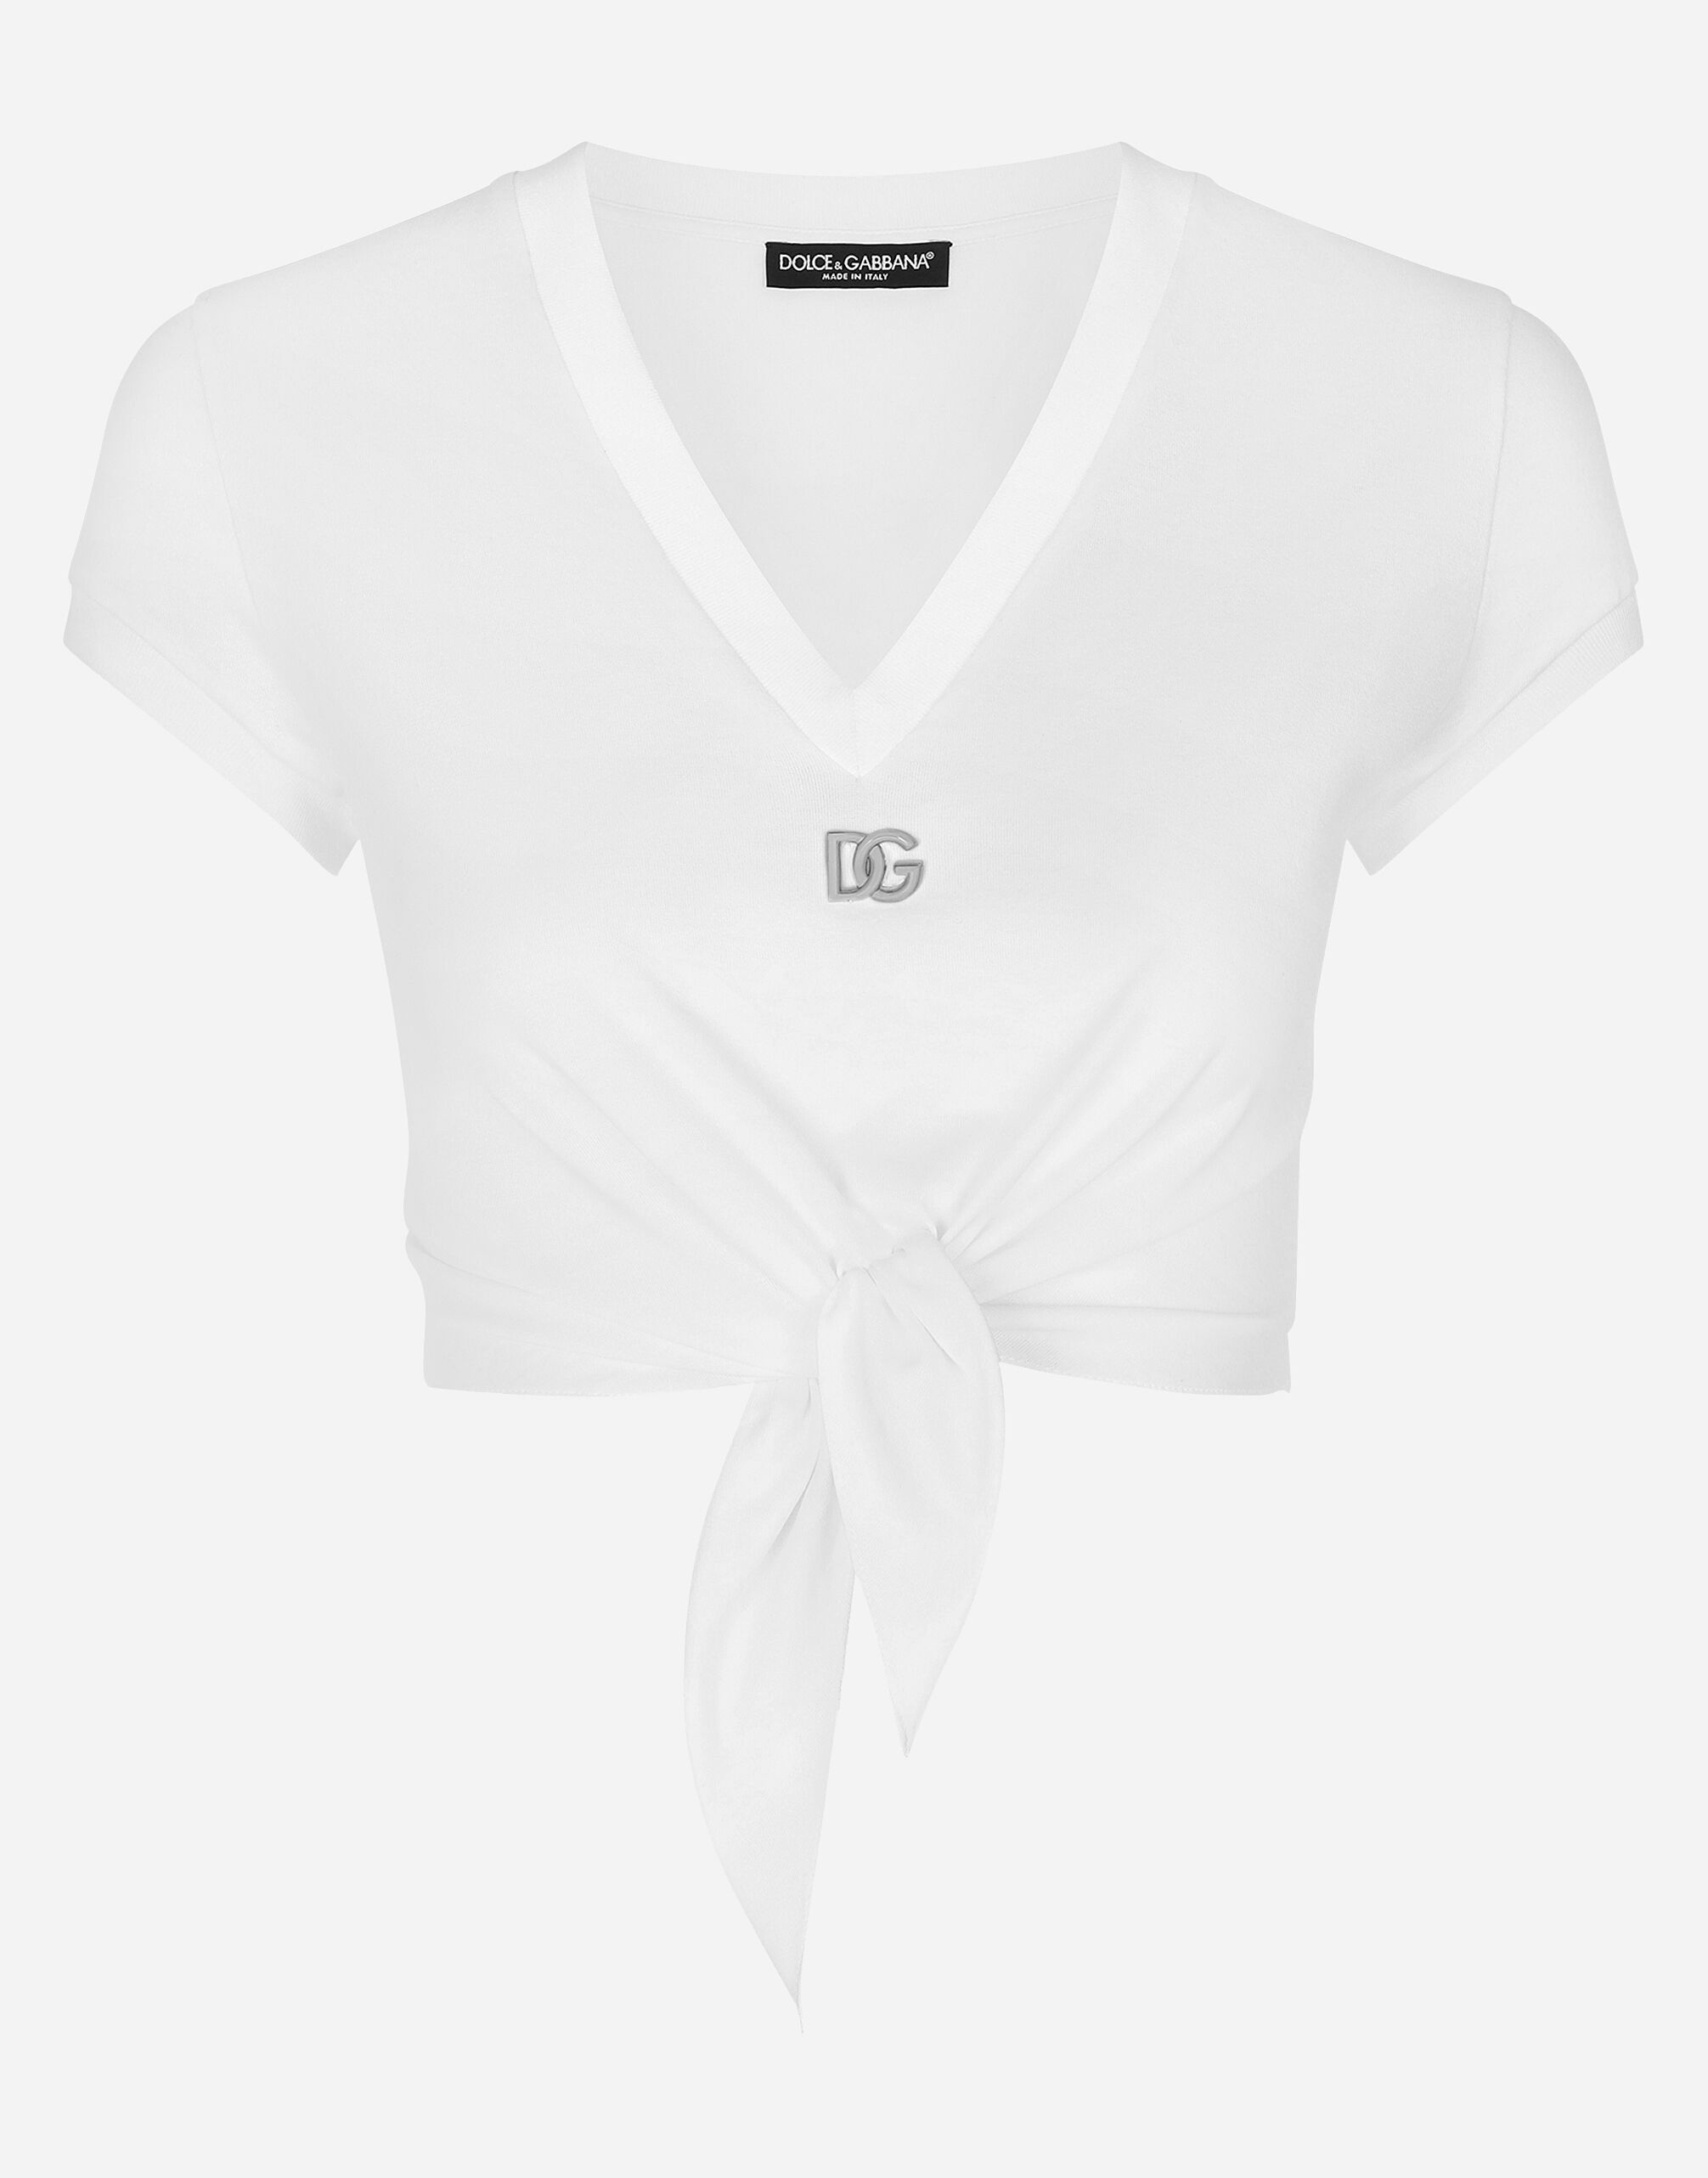 ${brand} Jersey T-shirt with DG logo and knot detail ${colorDescription} ${masterID}